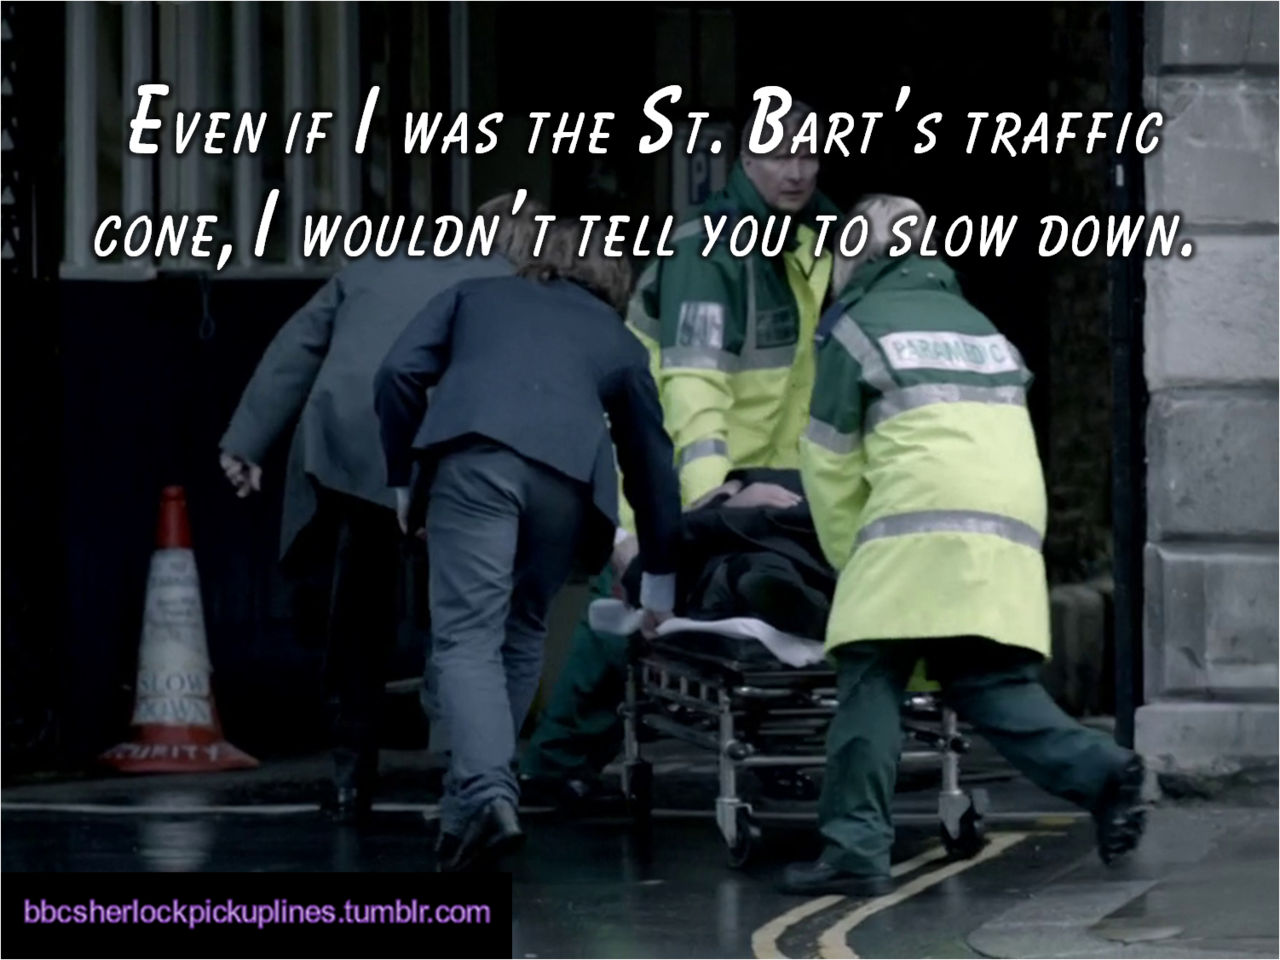 &ldquo;Even if I was the St. Bart&rsquo;s traffic cone, I wouldn&rsquo;t